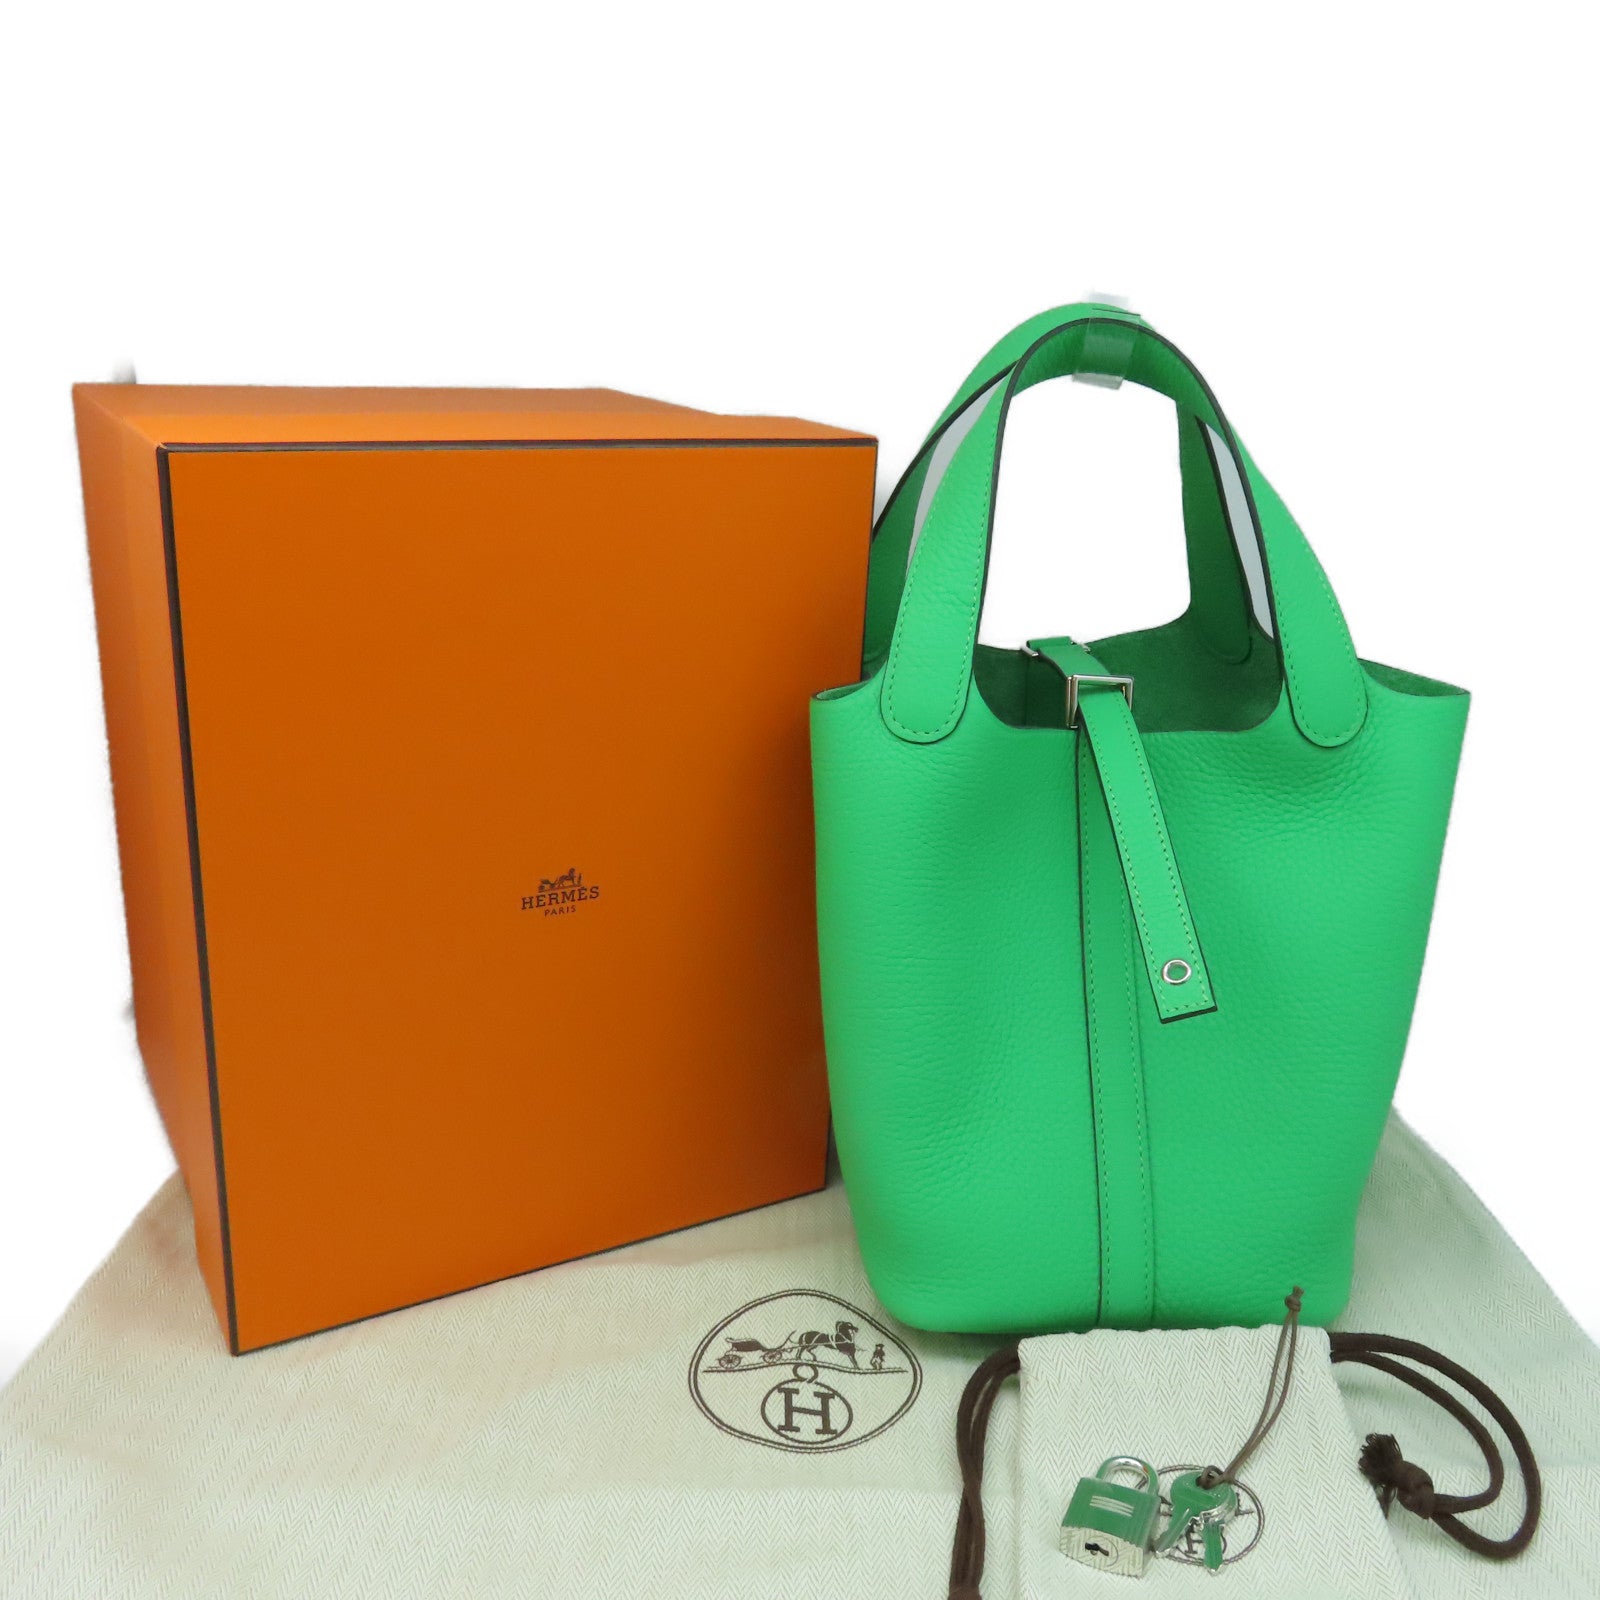 HERMÈS Picotin PM handbag in Vert Criquet Clemence leather with